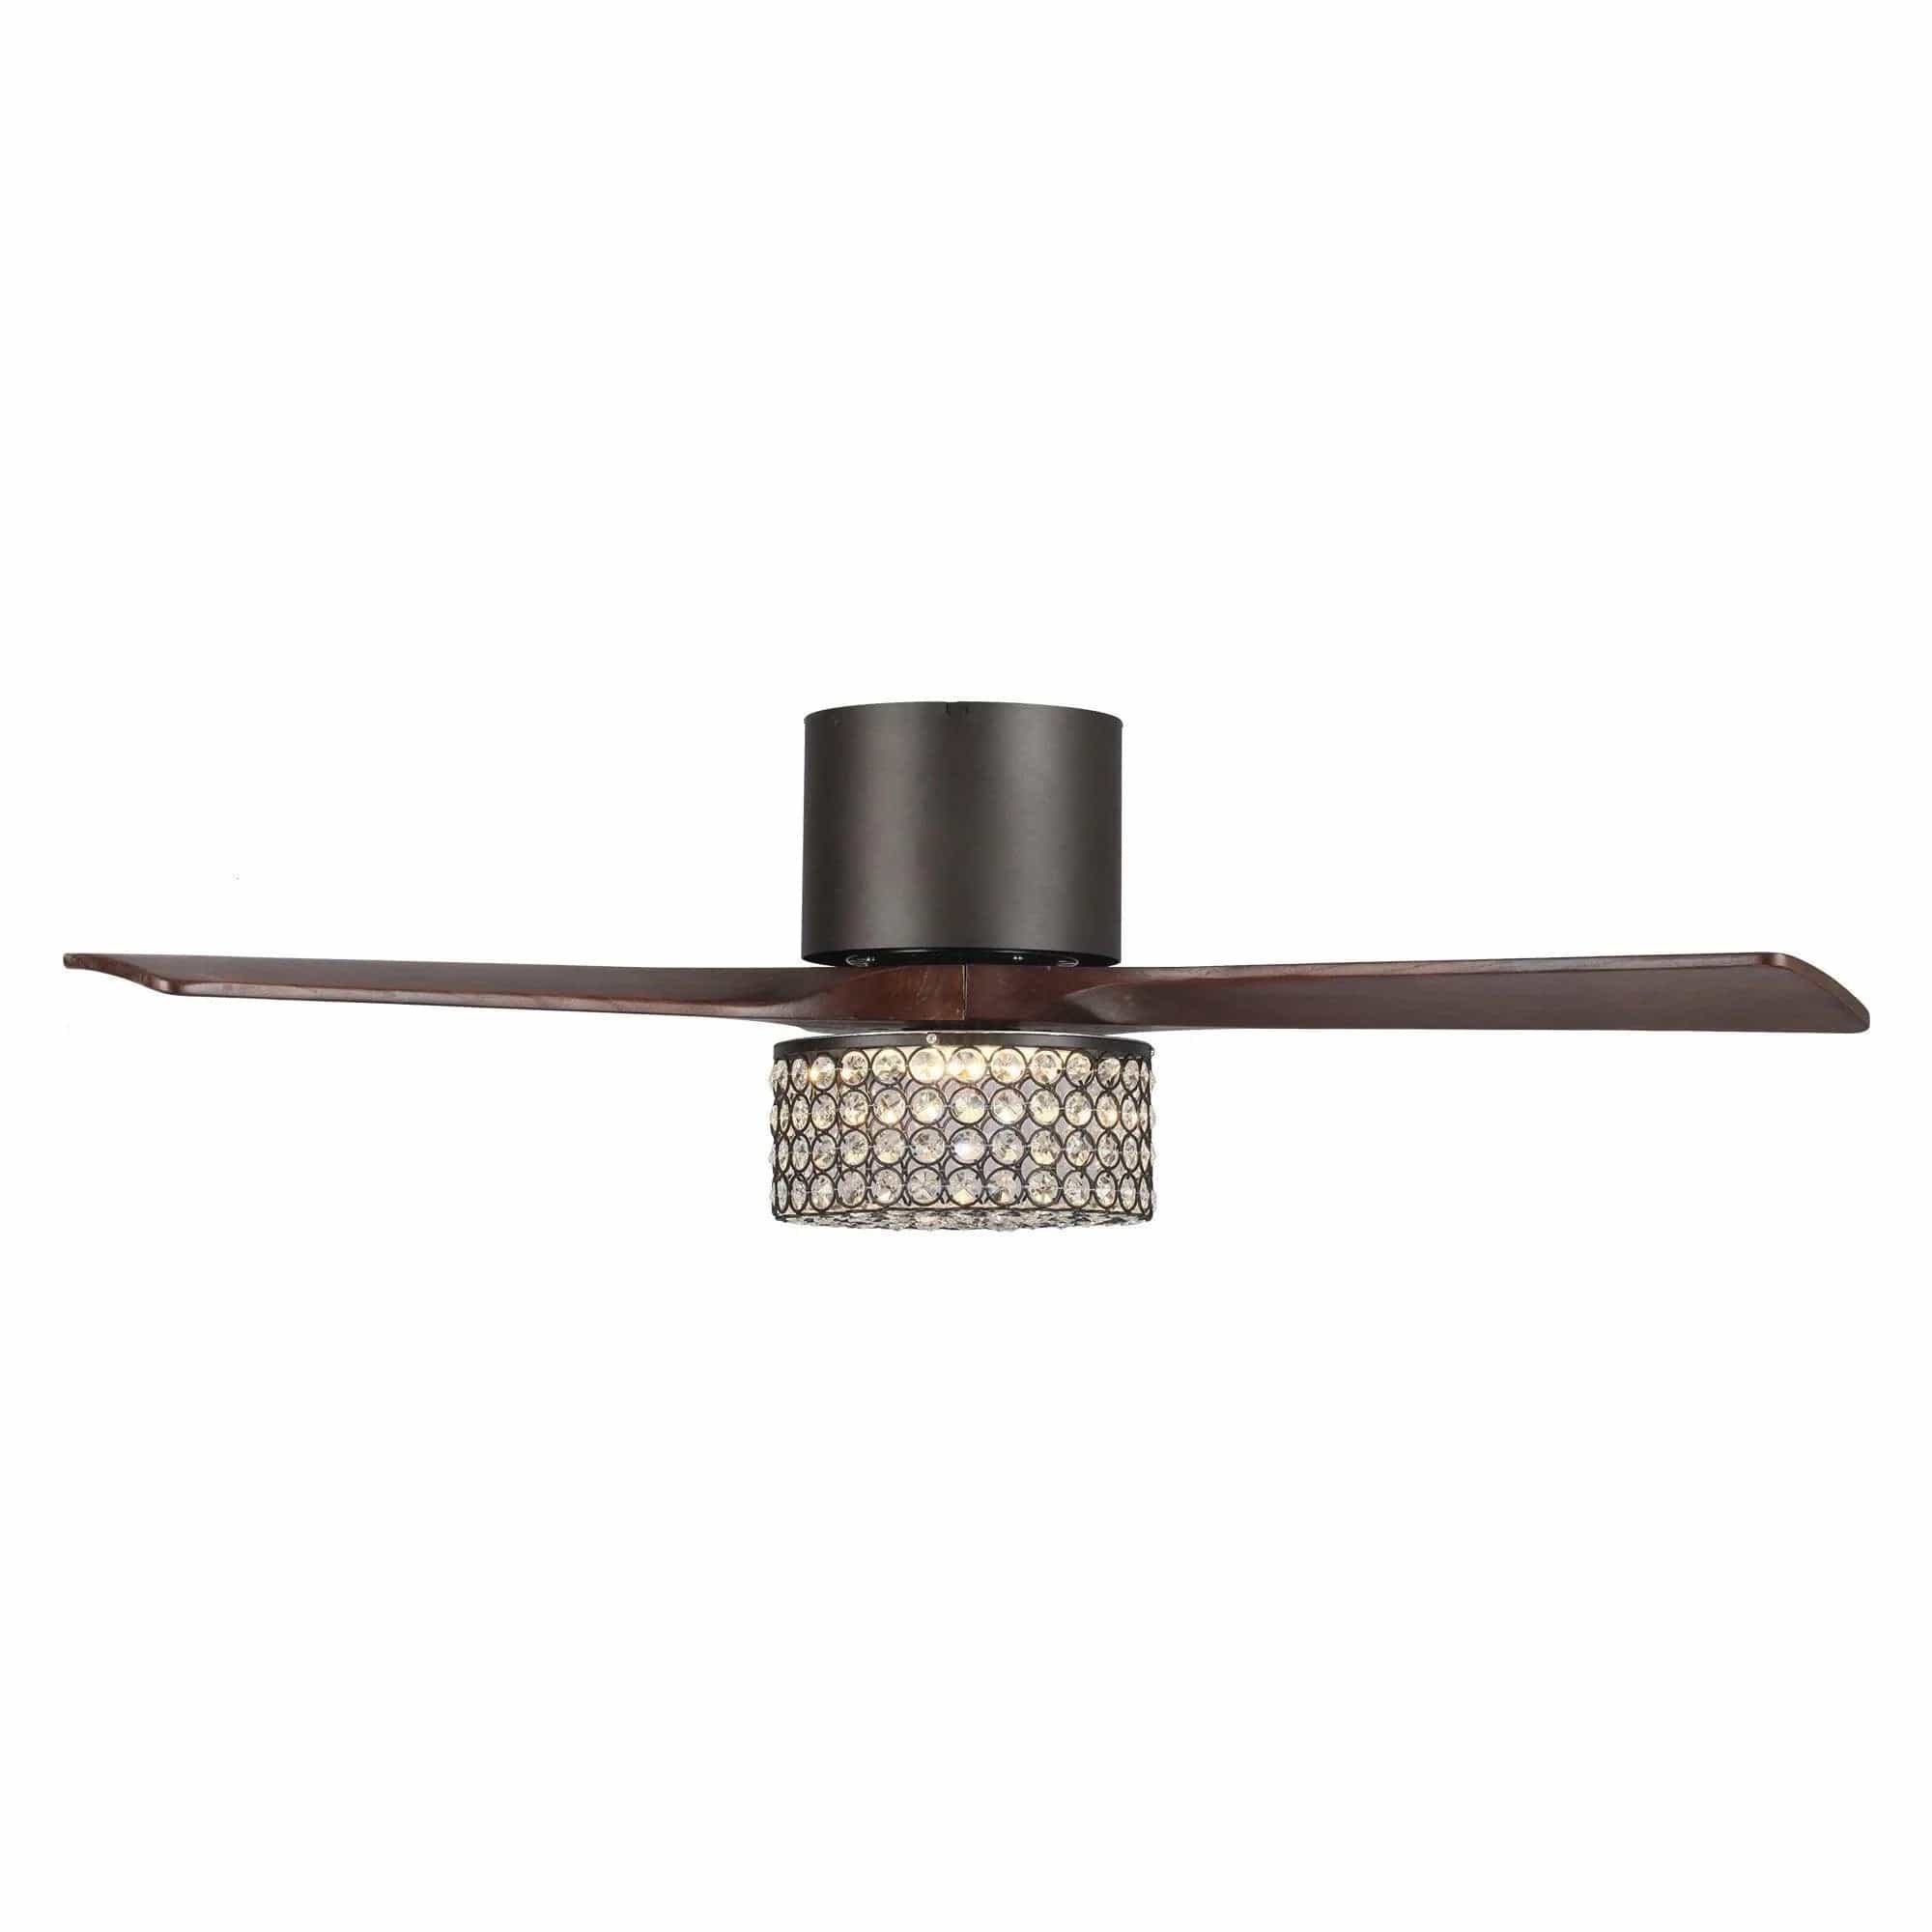 Parrot Uncle Parrot Uncle 48 In. Farmhouse Ceiling Fan with Lighting and Remote Control Ceiling Fan F6327110V